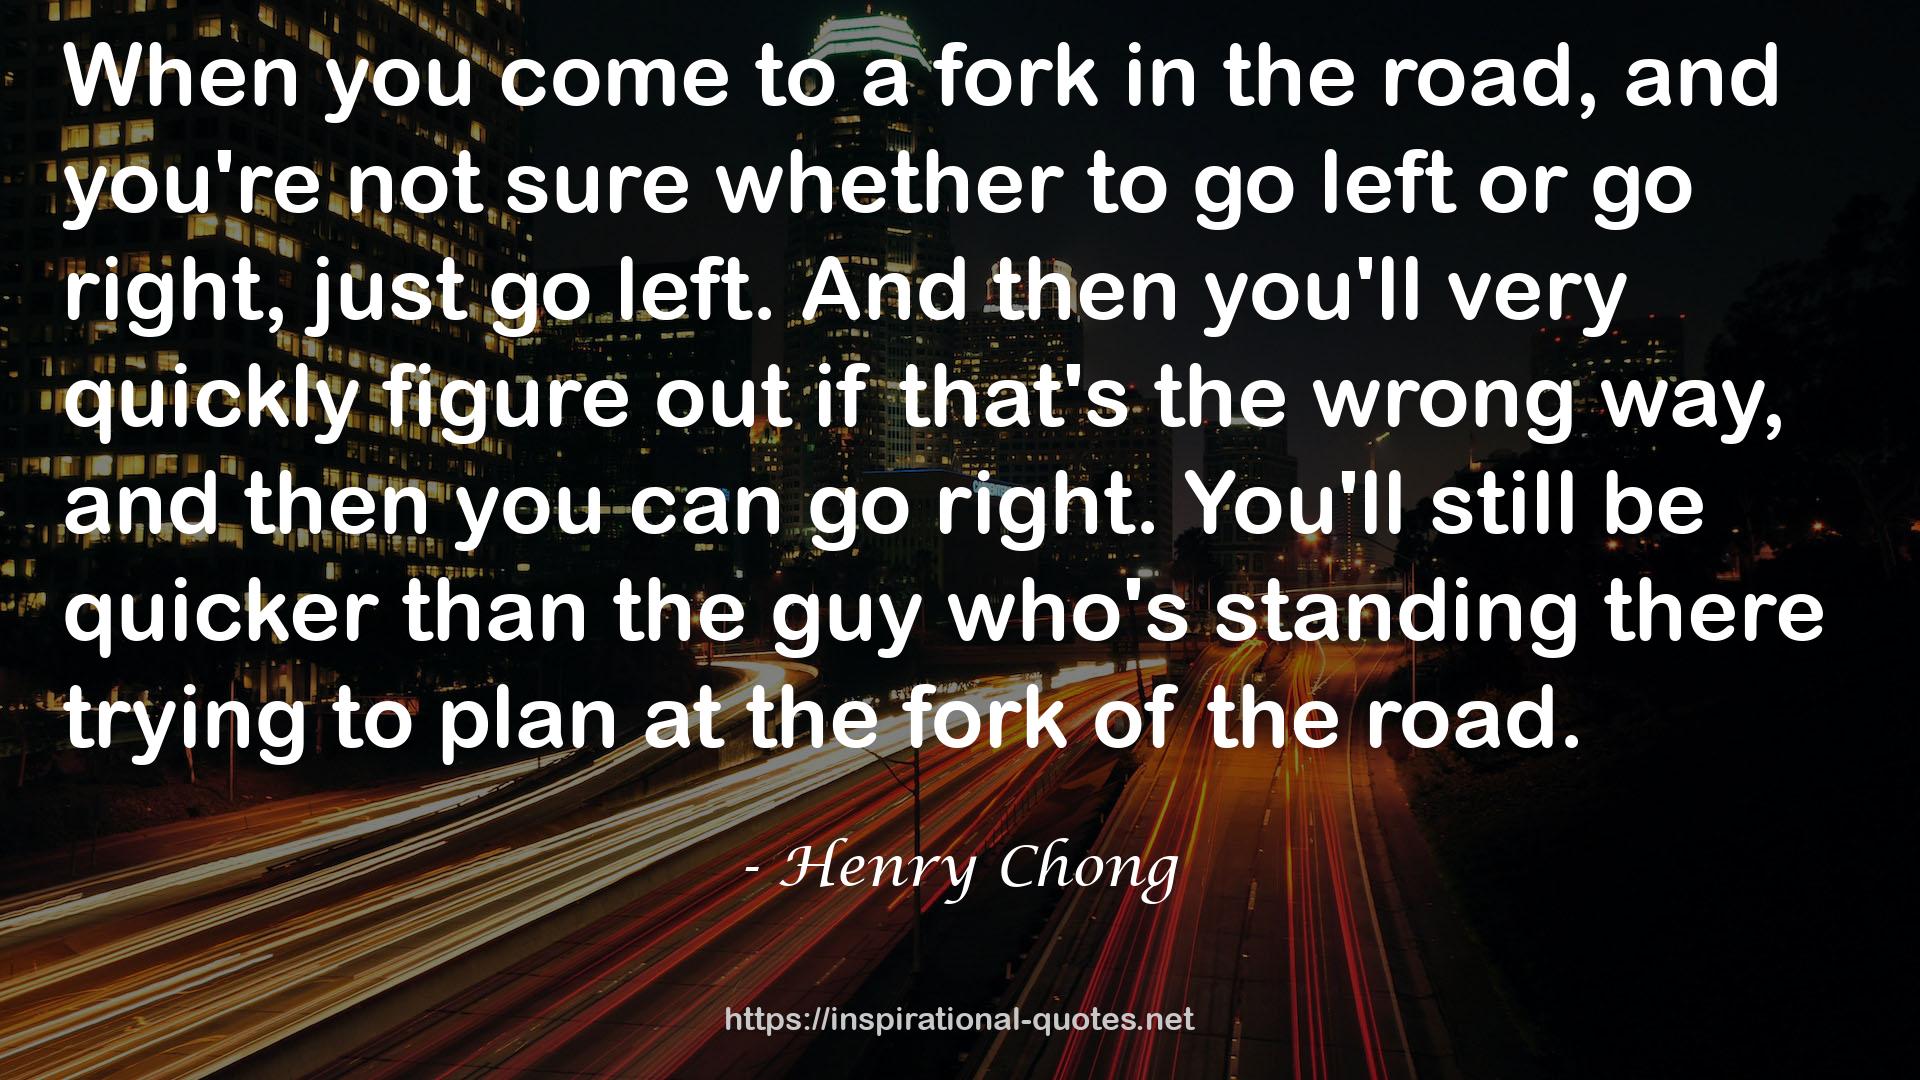 Henry Chong QUOTES